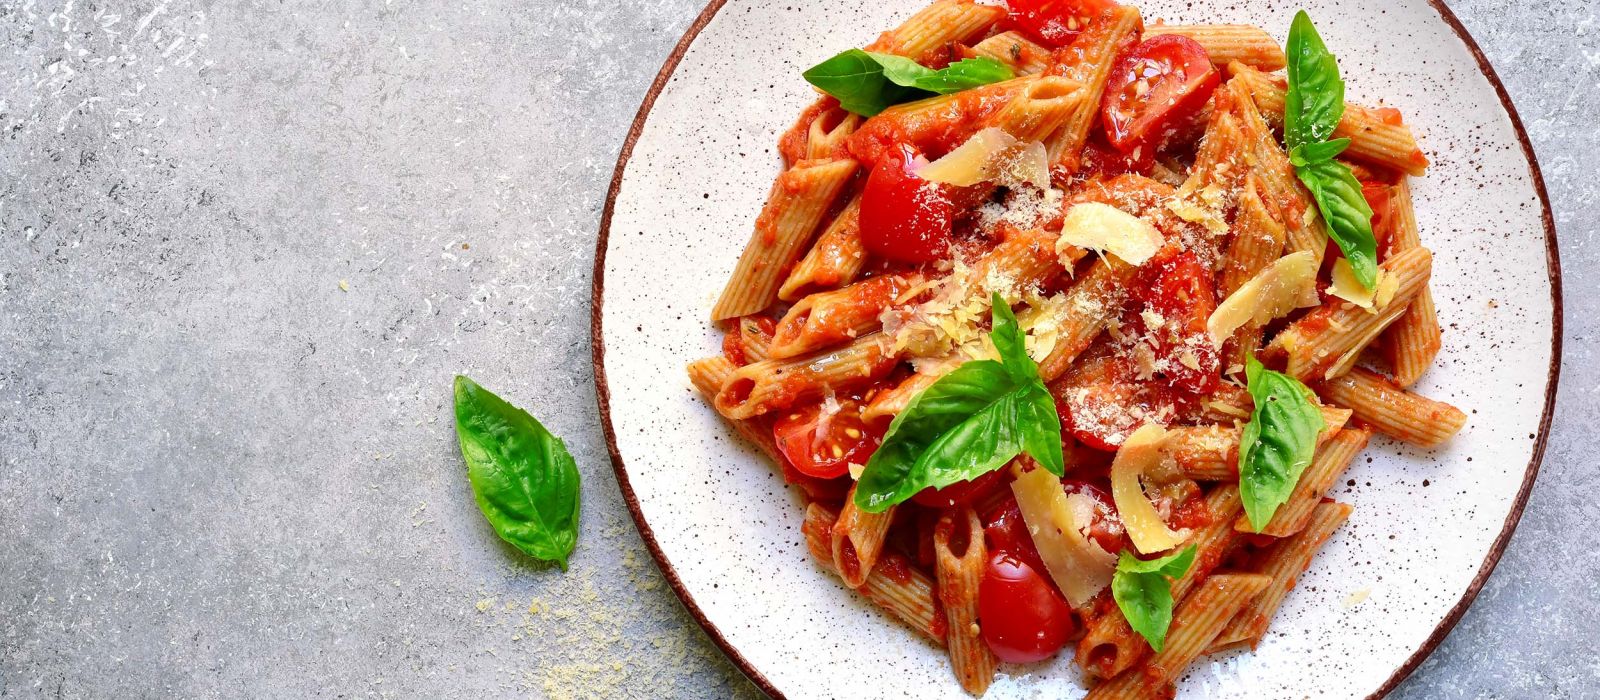 Penne pasta with tomato in red sauce.